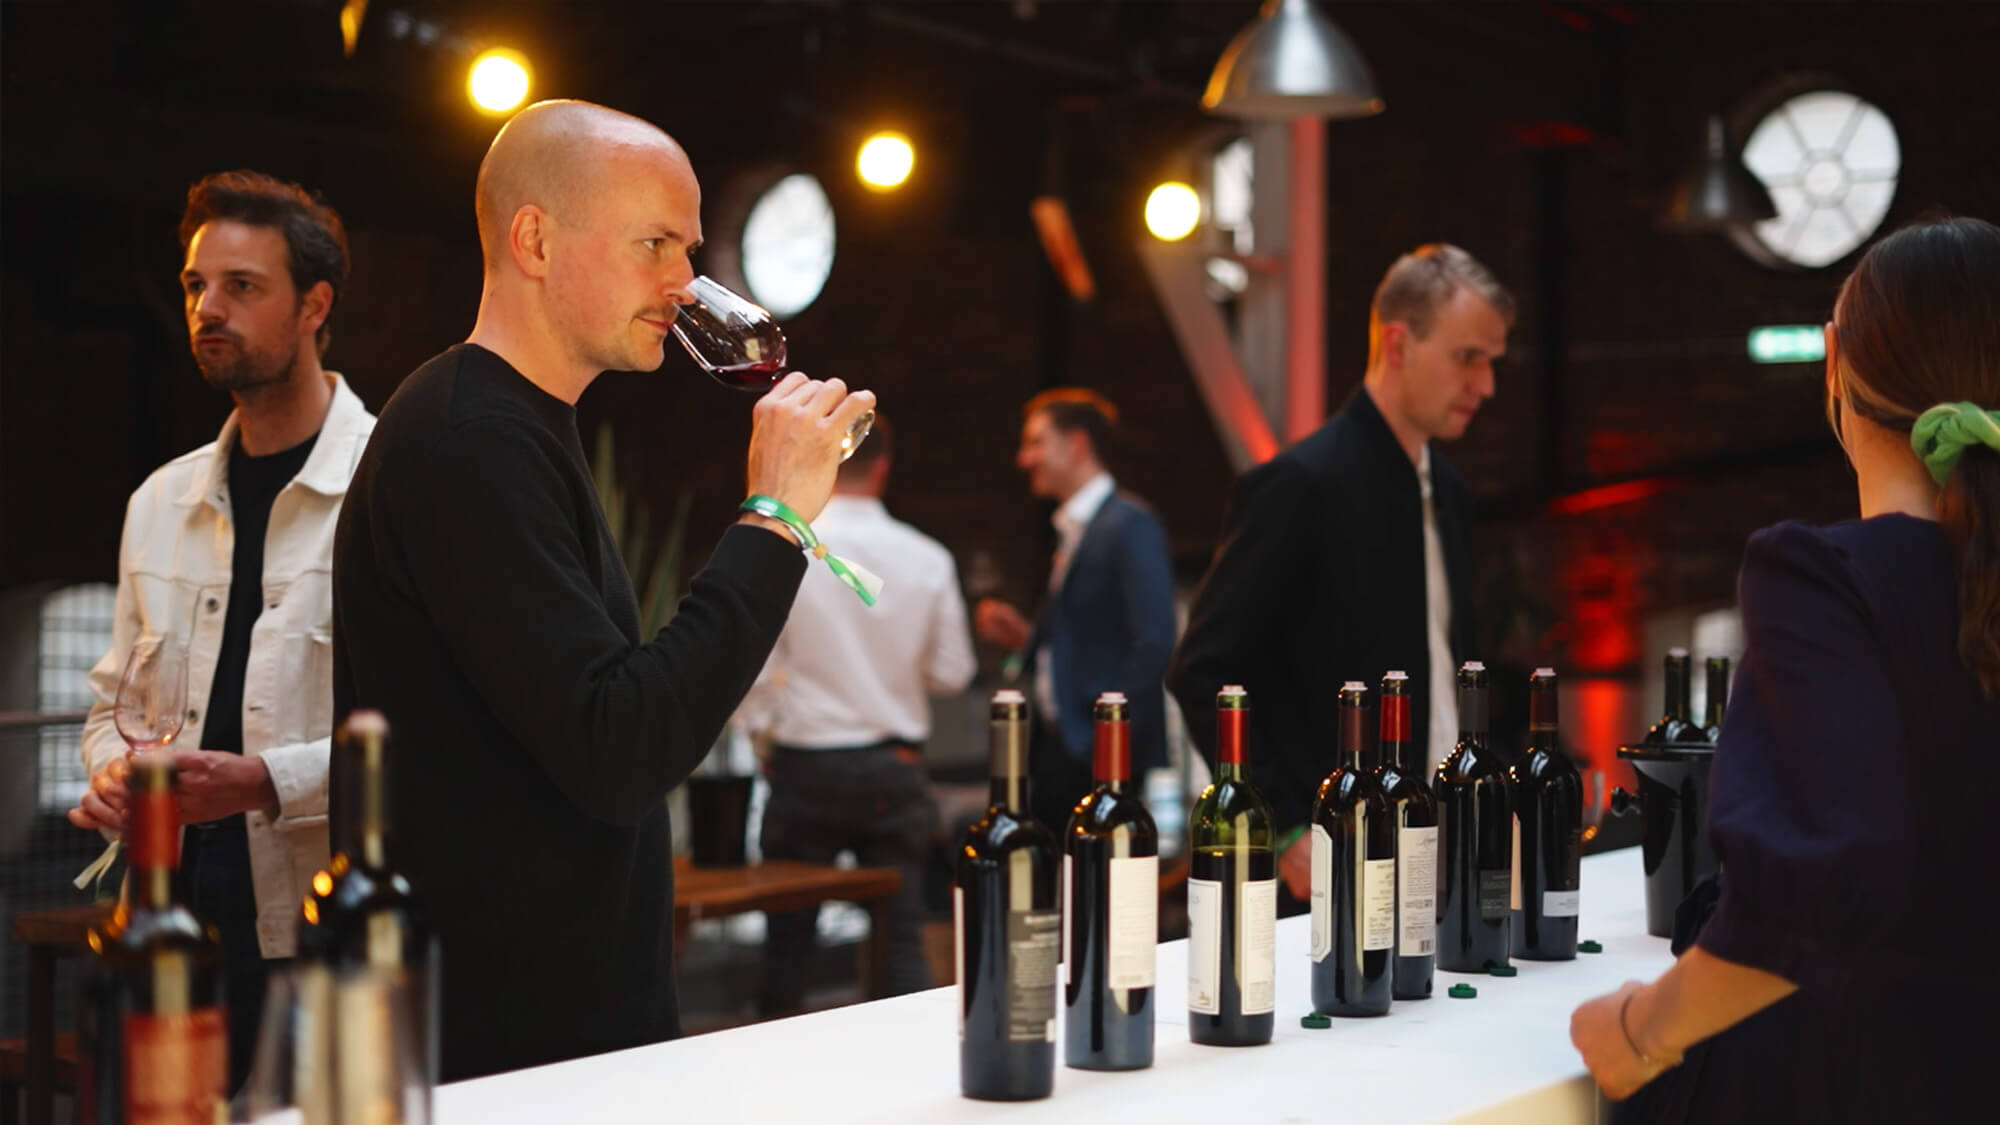 An event attendee tasting a glass of wine at a live event